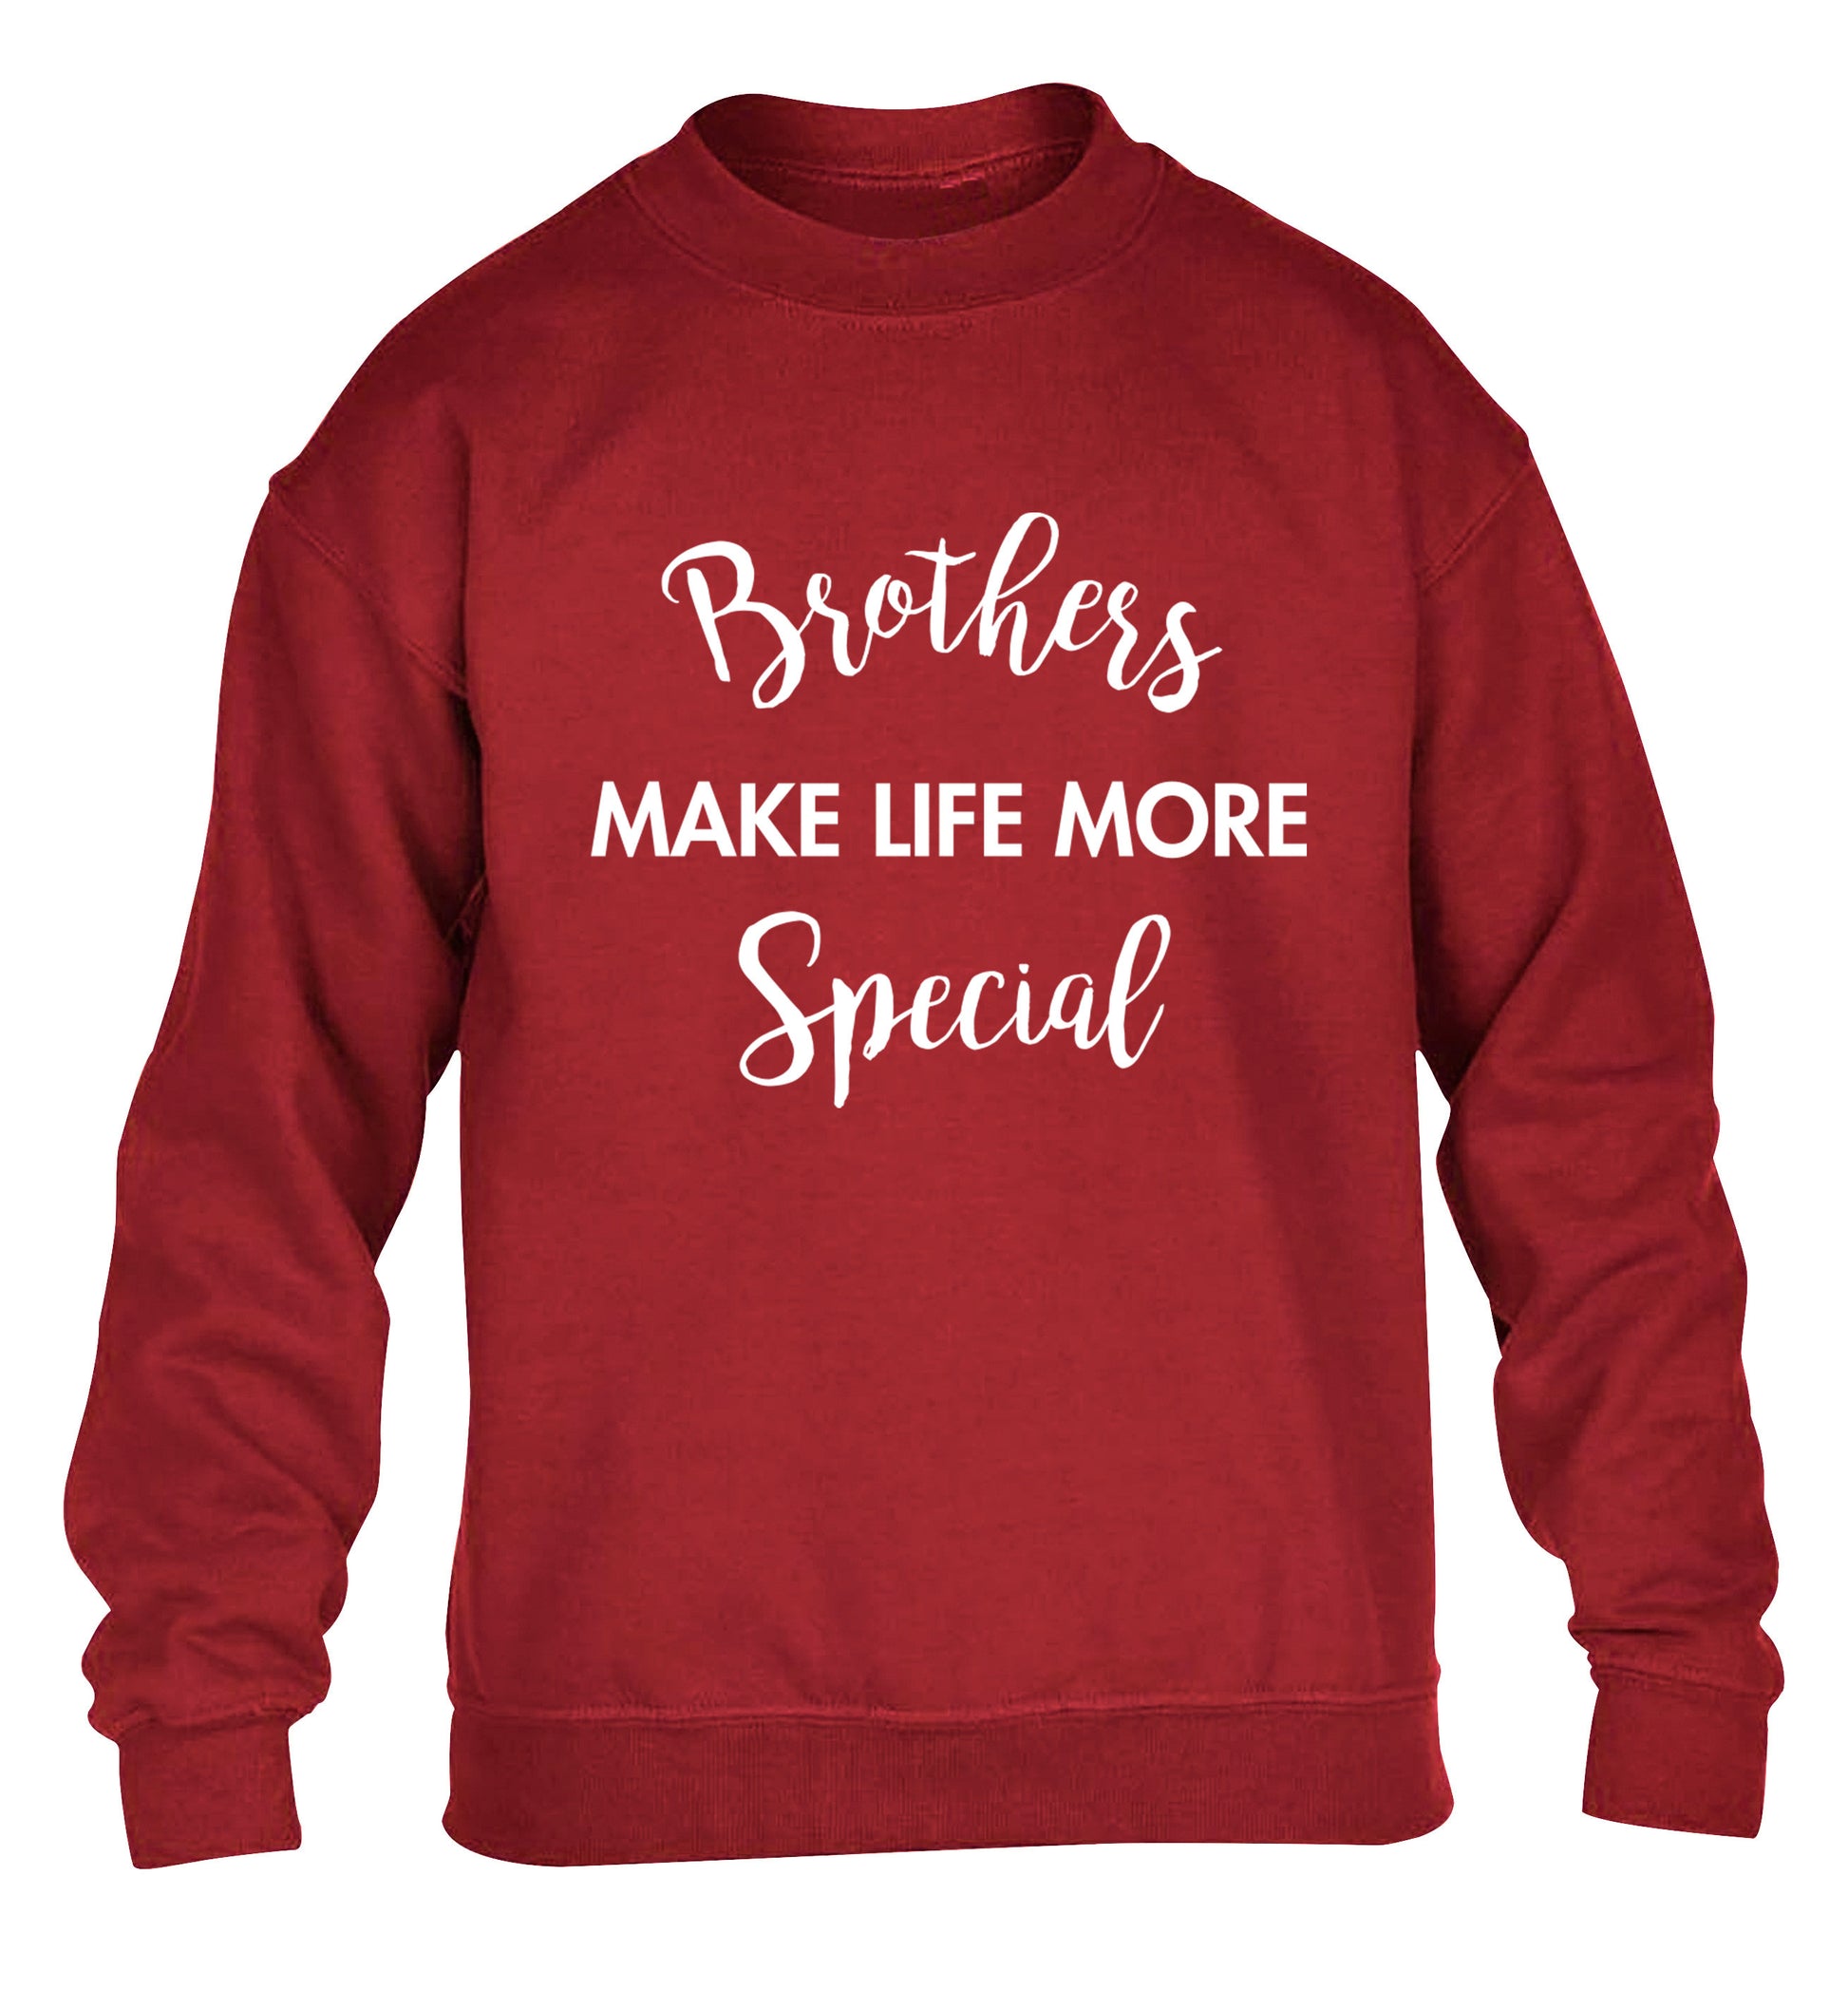 Brothers make life more special children's grey sweater 12-14 Years